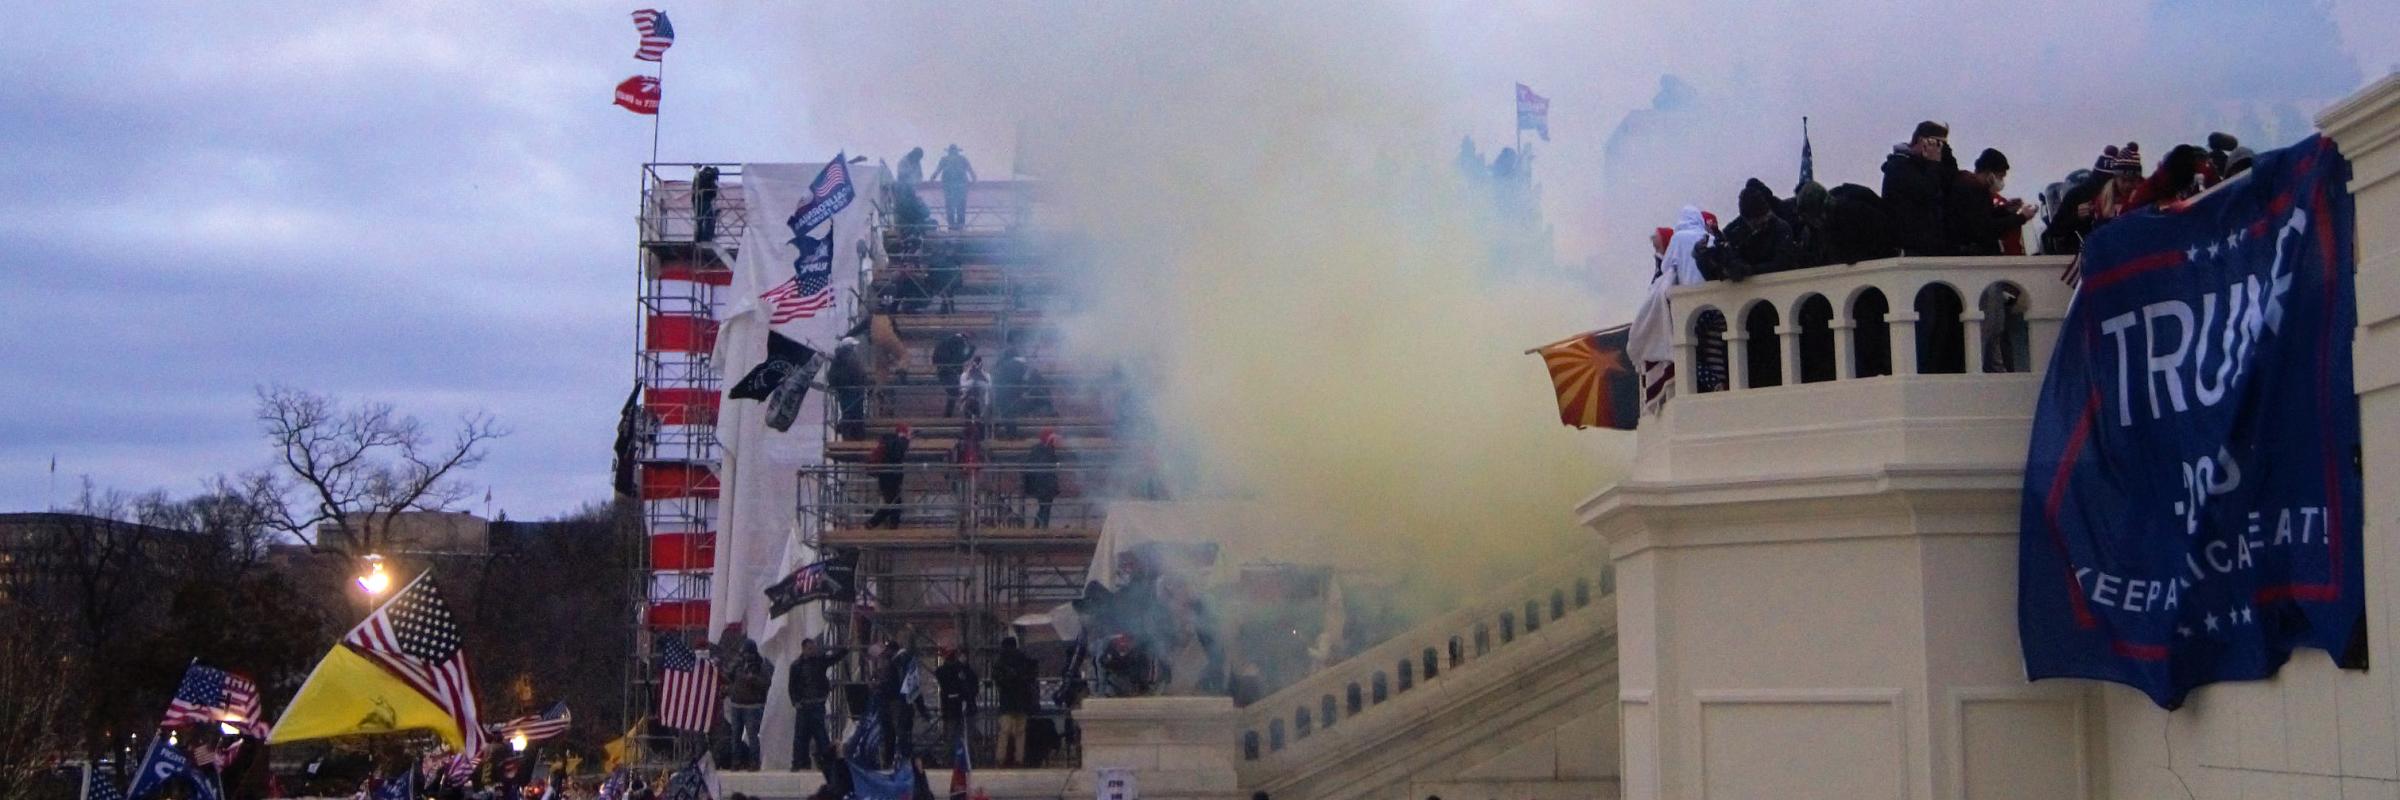 Tear gas at the U.S. Capitol on January 6, 2021